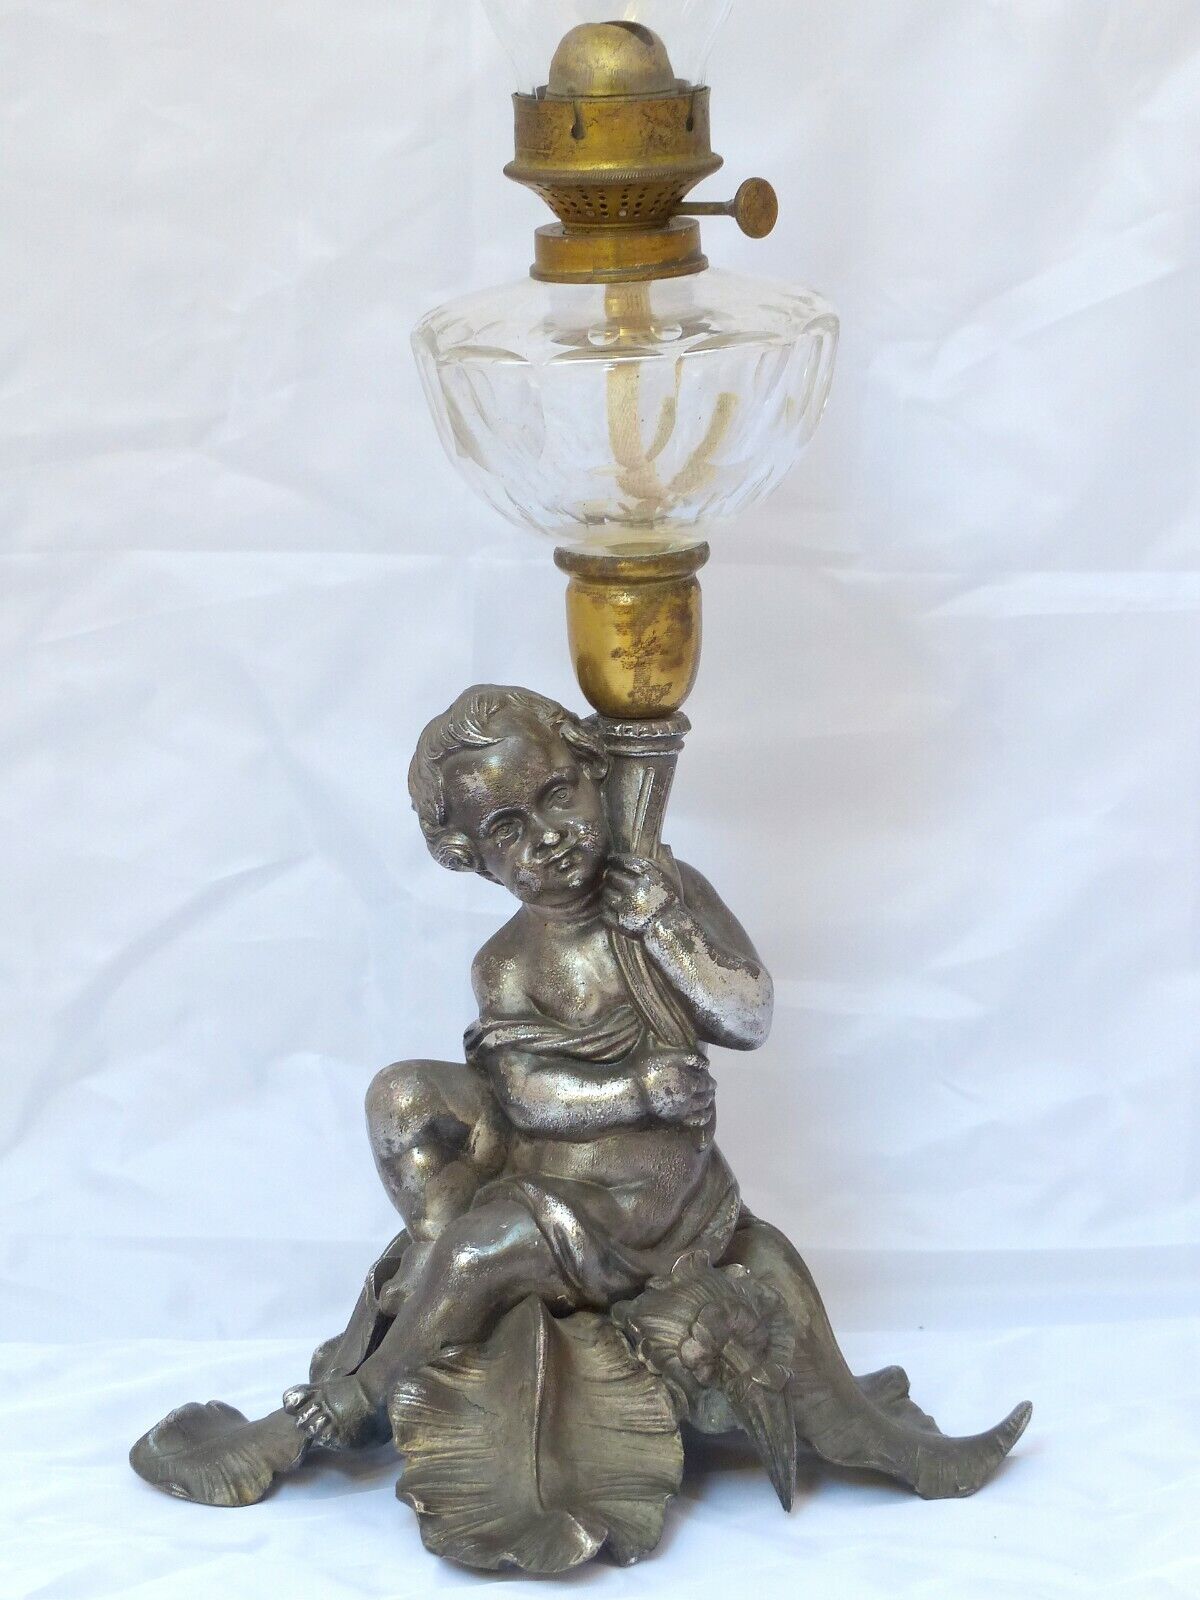 Superb Antique French Oil Lamp Figural Cherub Complete 19TH Silverplated